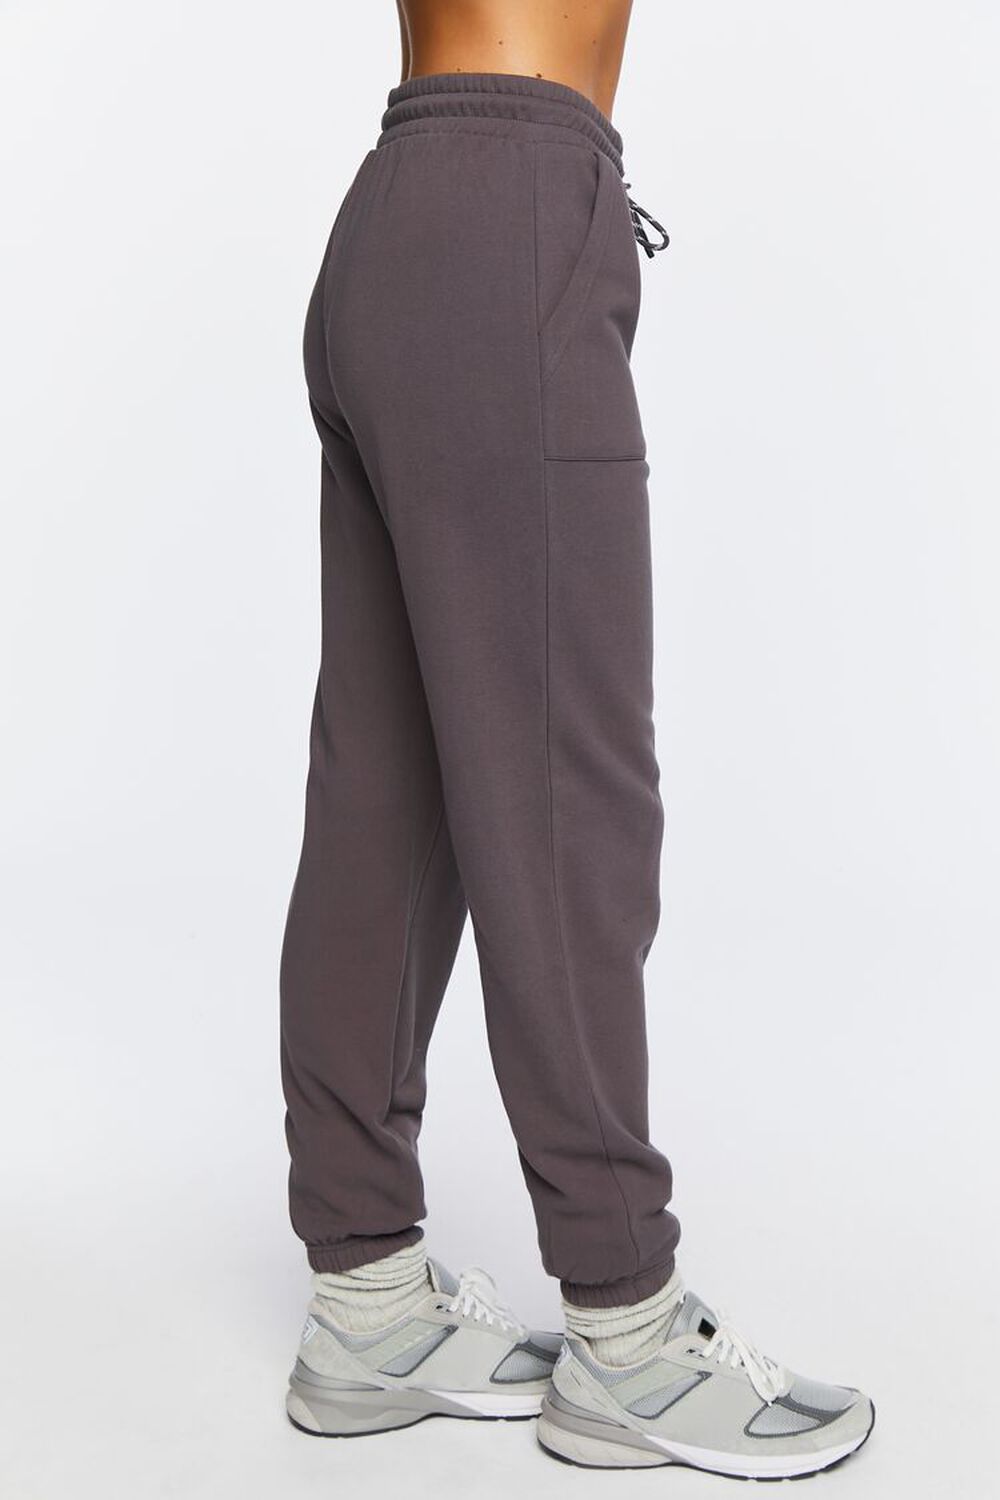 CHARCOAL Active French Terry Joggers, image 3